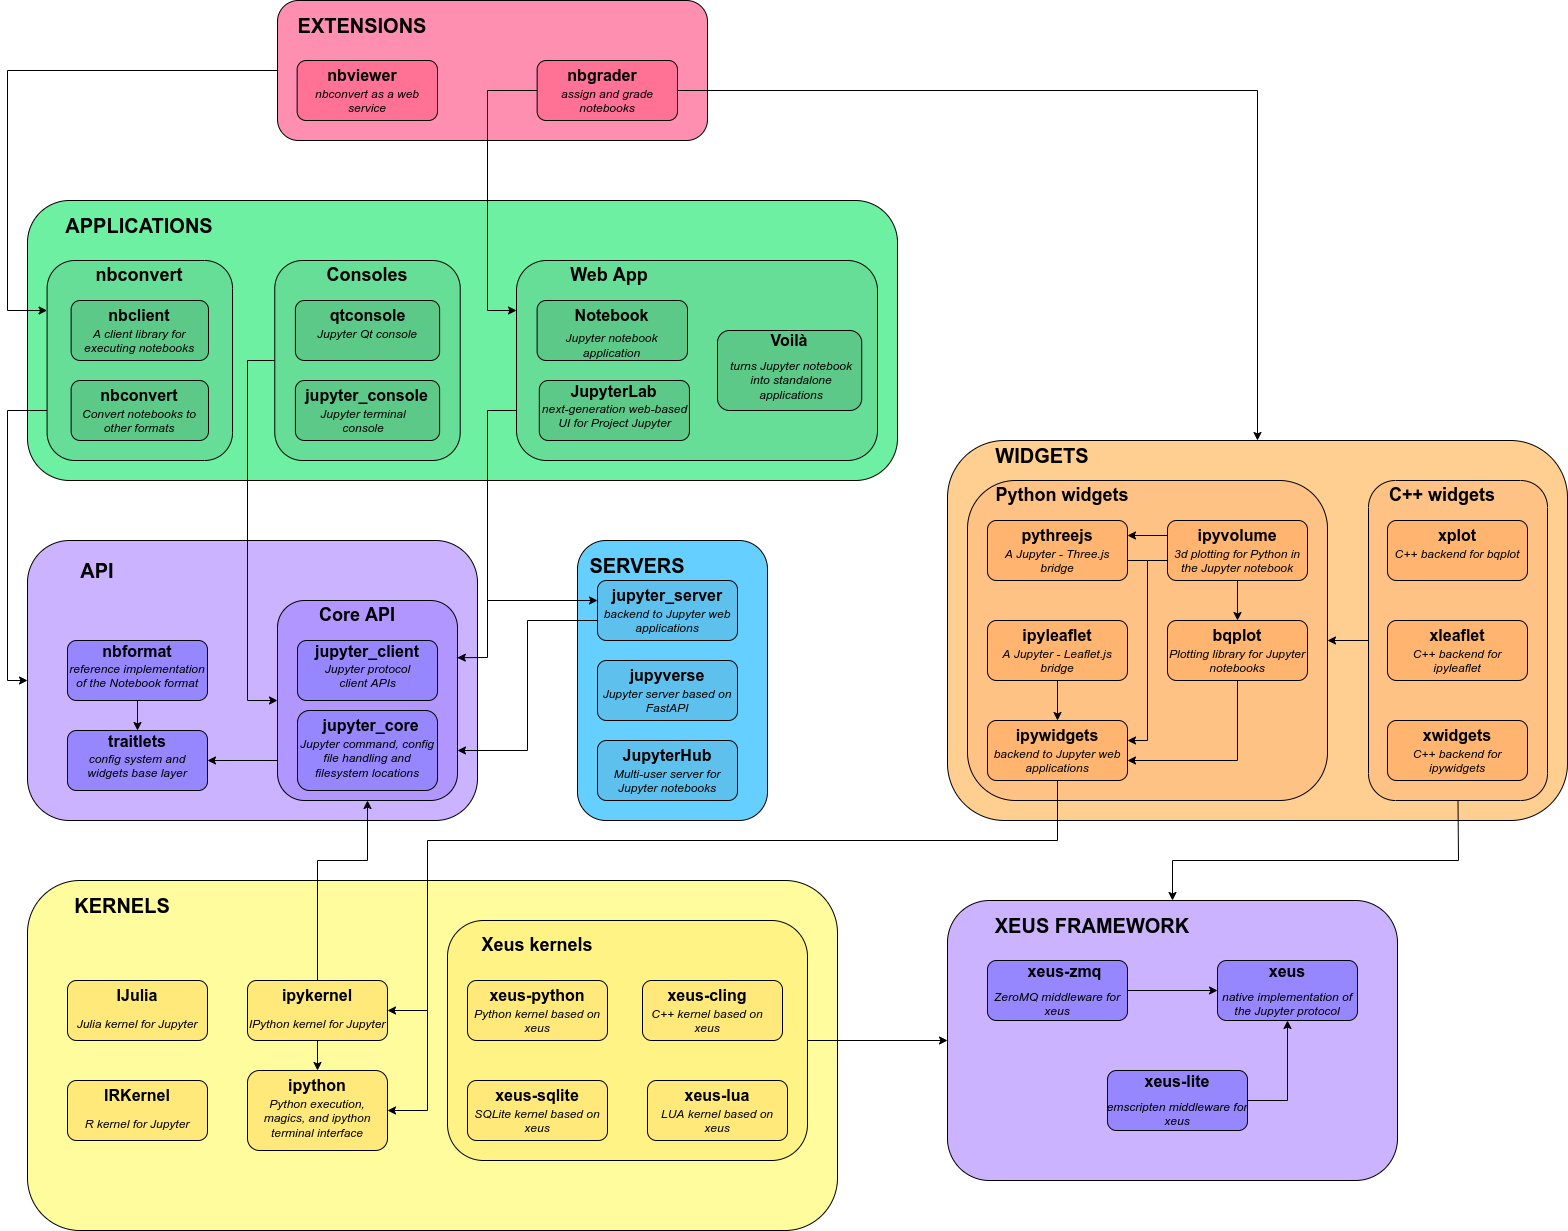 Architecture diagram of Jupyter project relationships from servers, applications, API, and kernels.